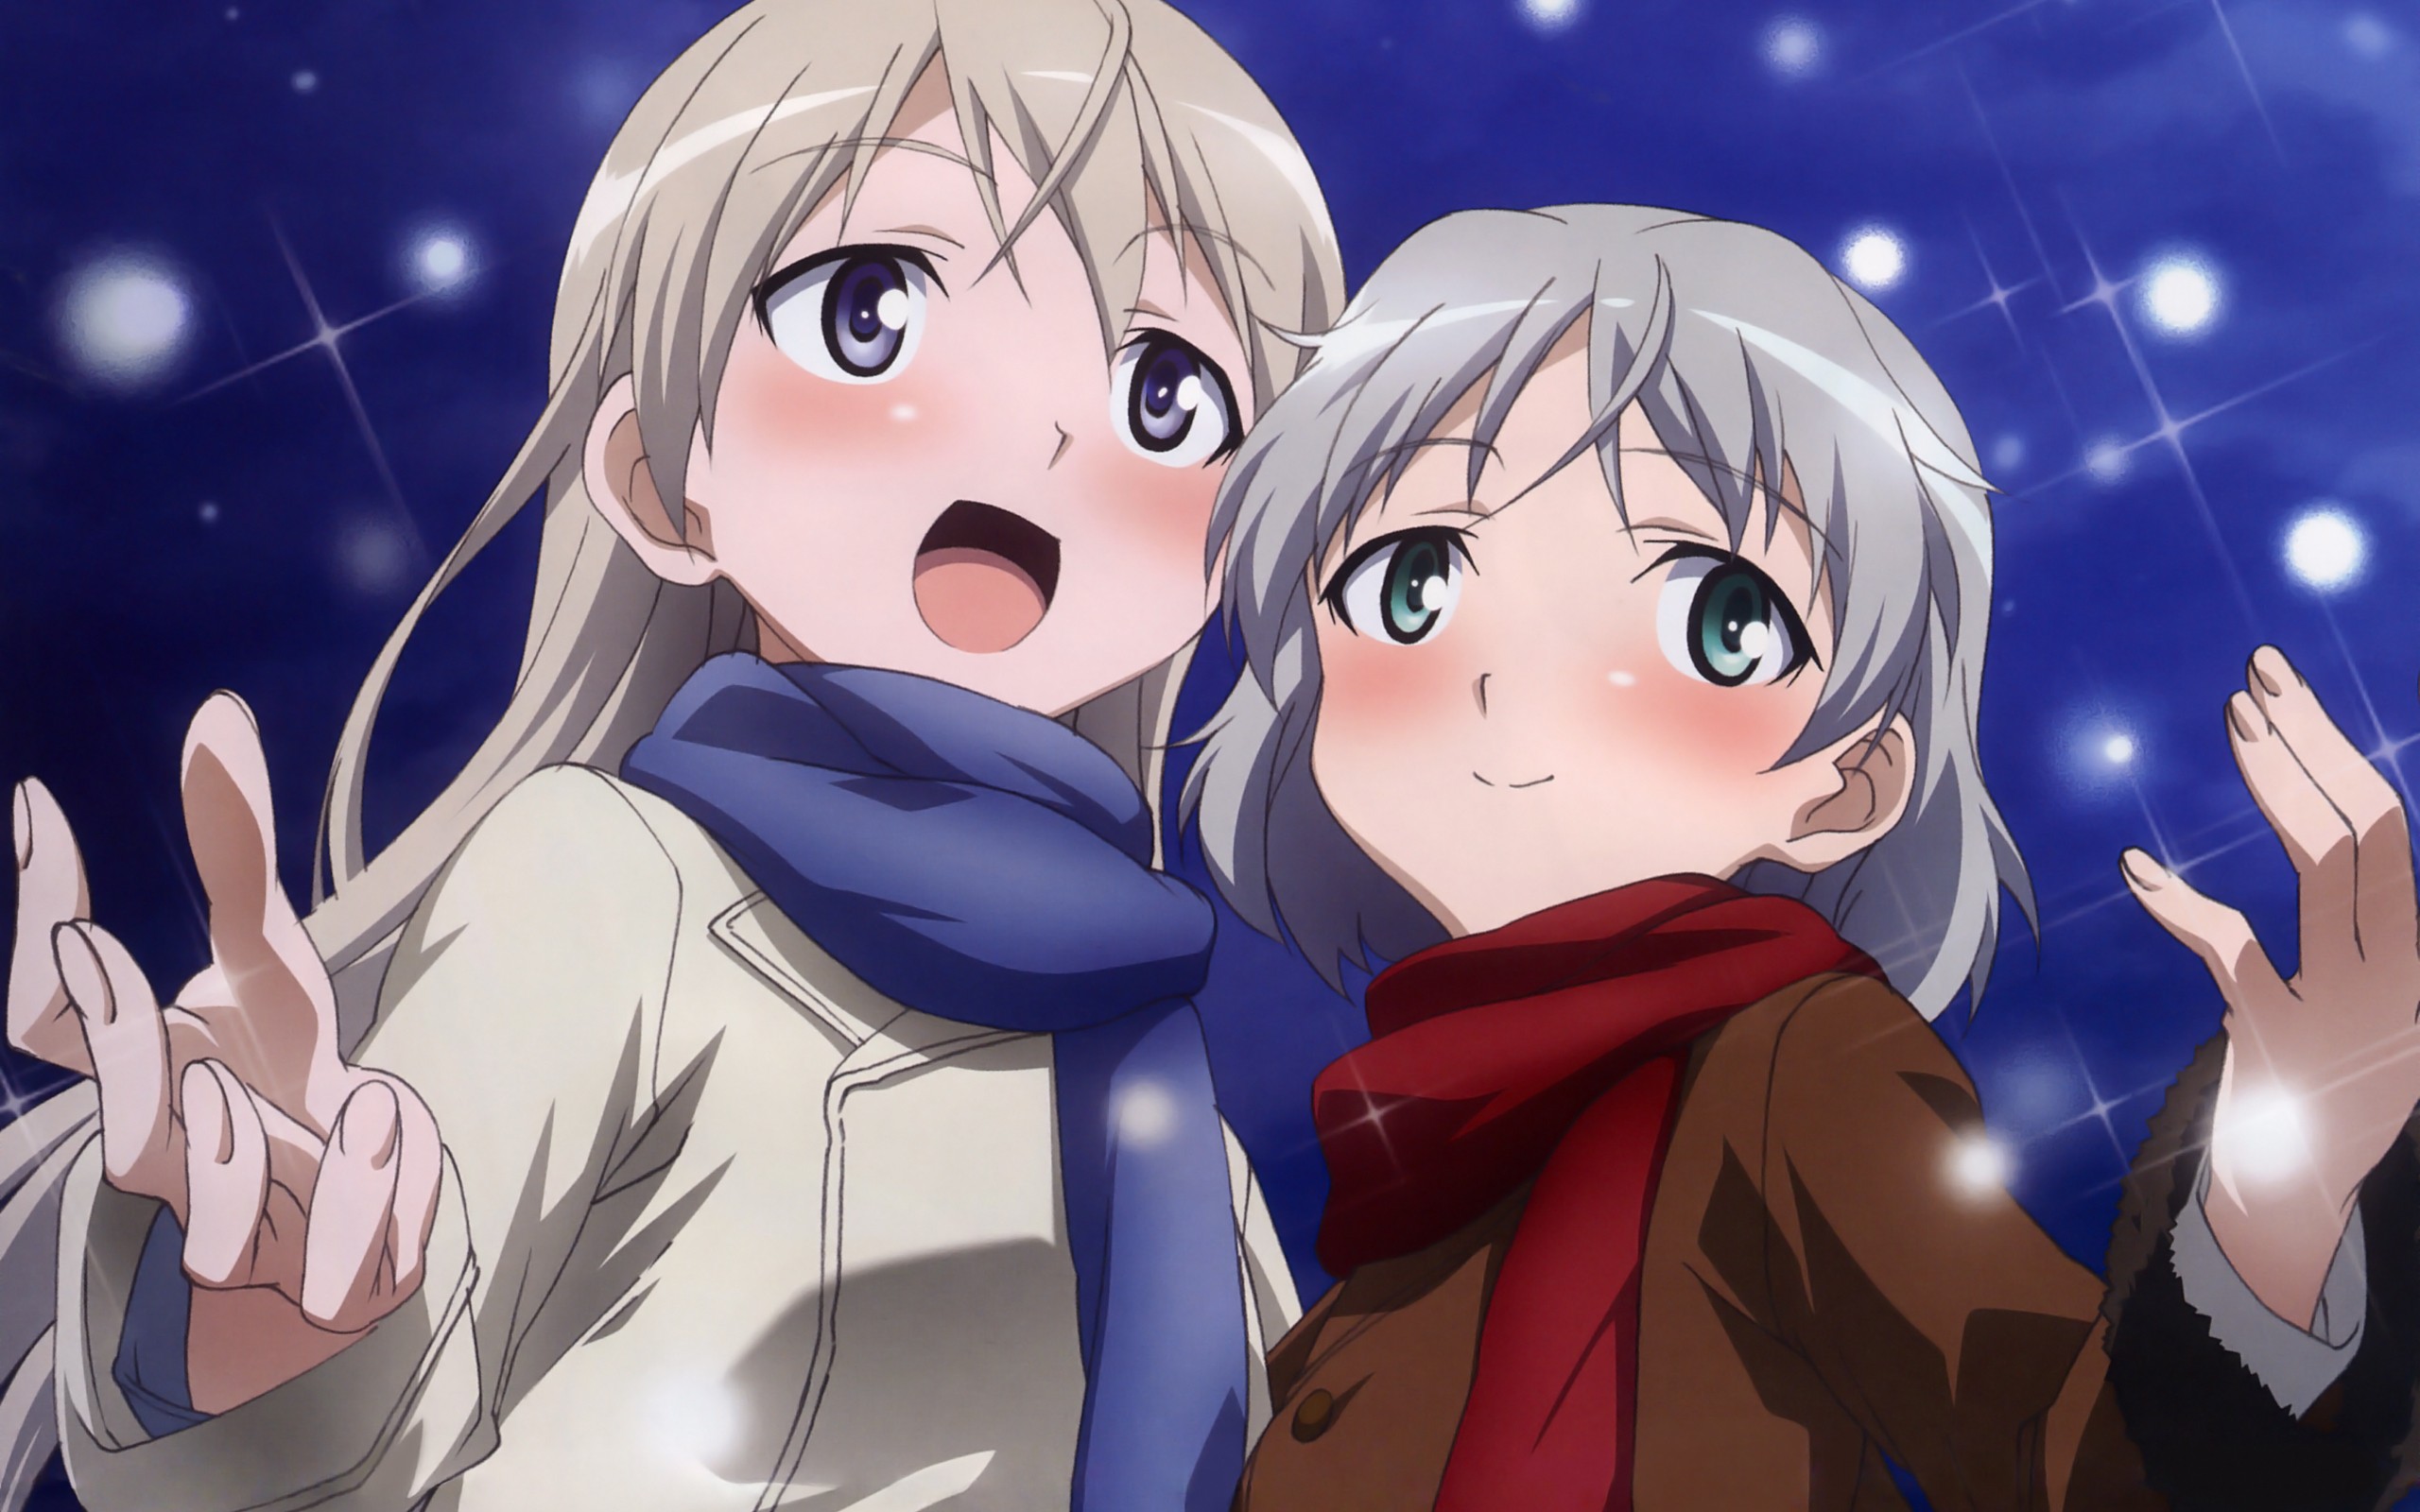 Strike Witches: The Movie #14